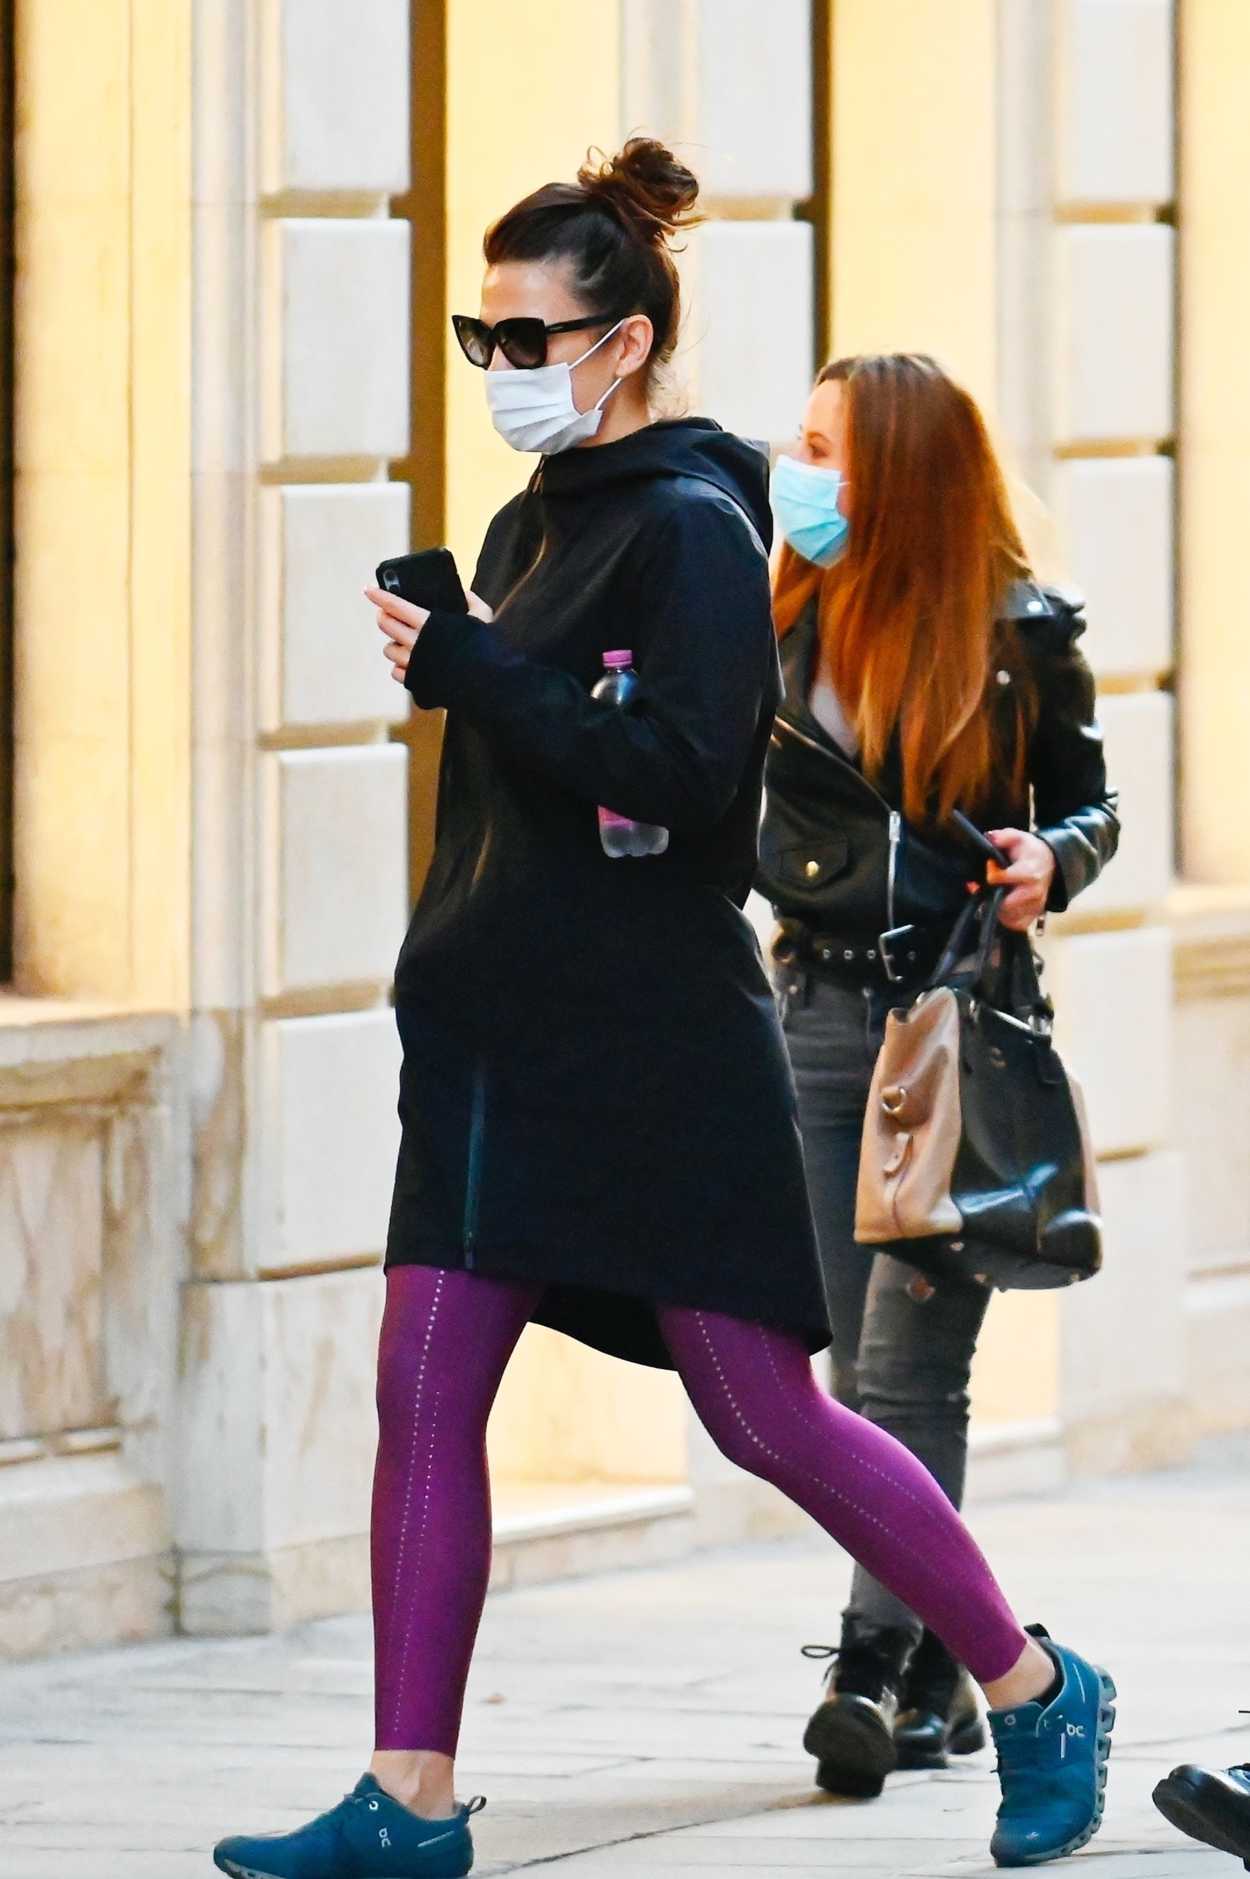 Hayley Atwell in a Purple Leggings Steps Out for a Walk During Break